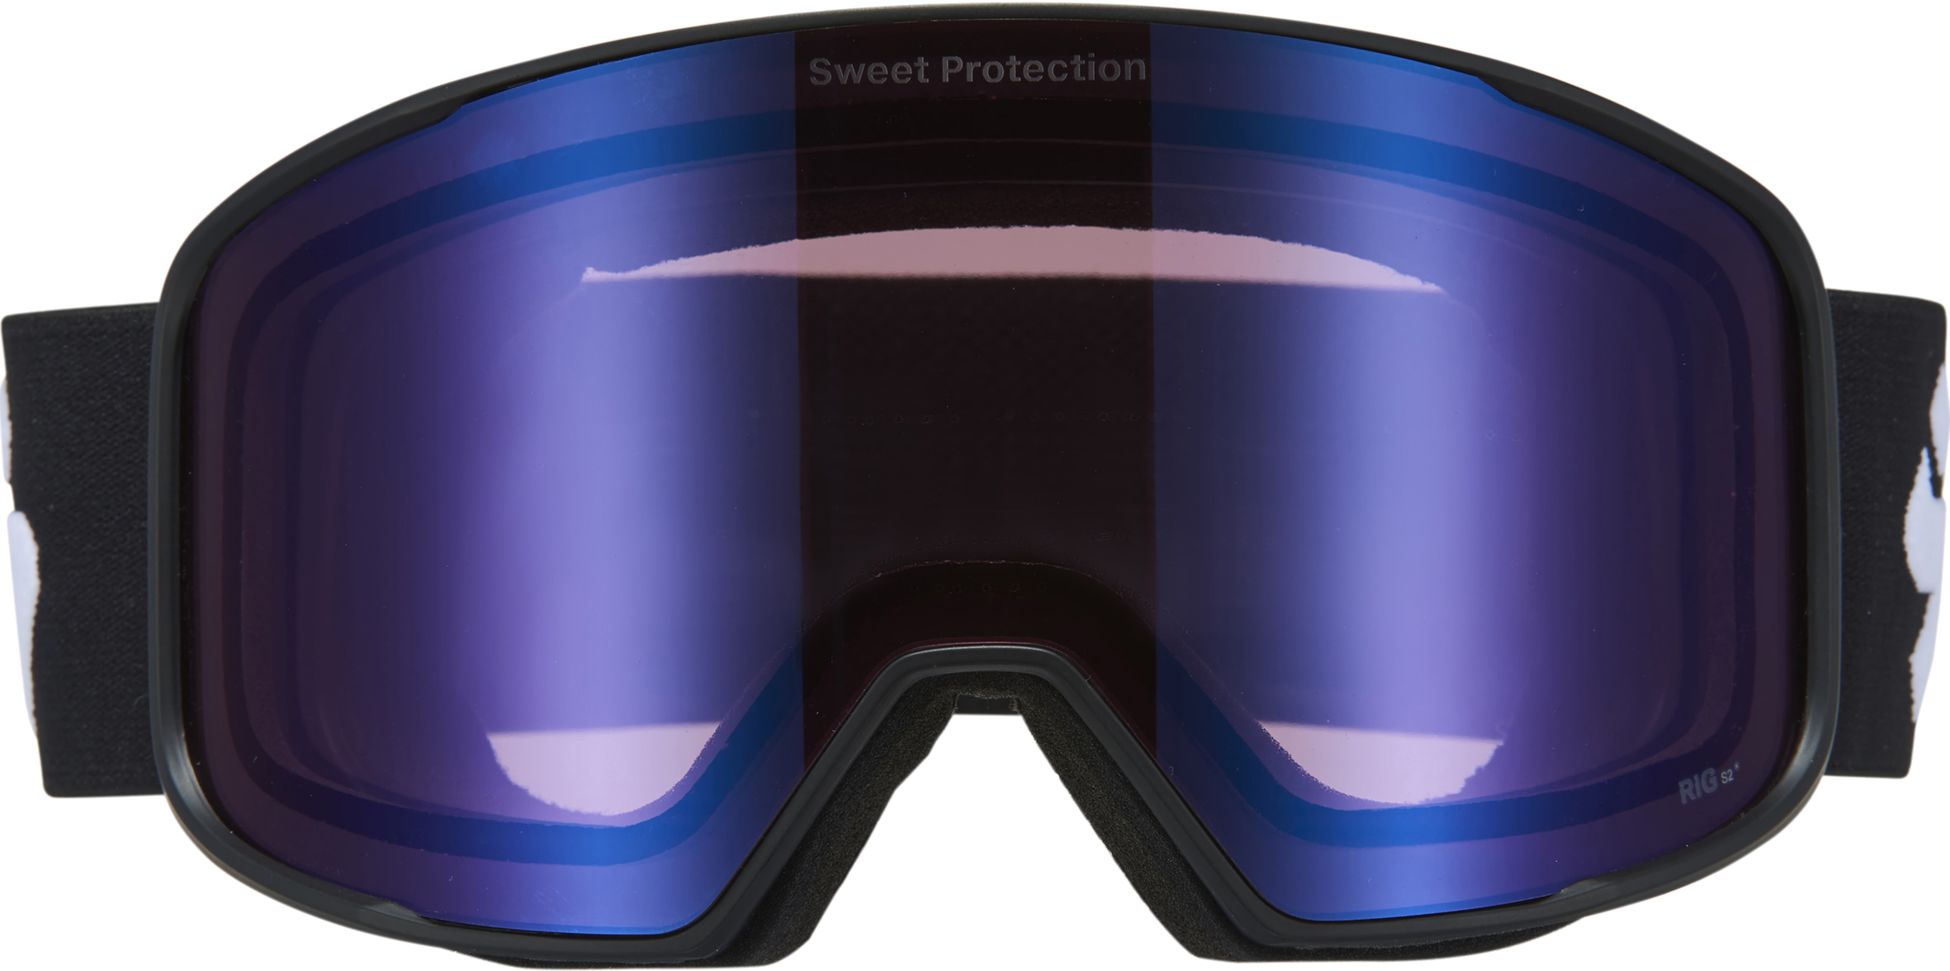 SWEET PROTECTION, Boondock RIG Reflect